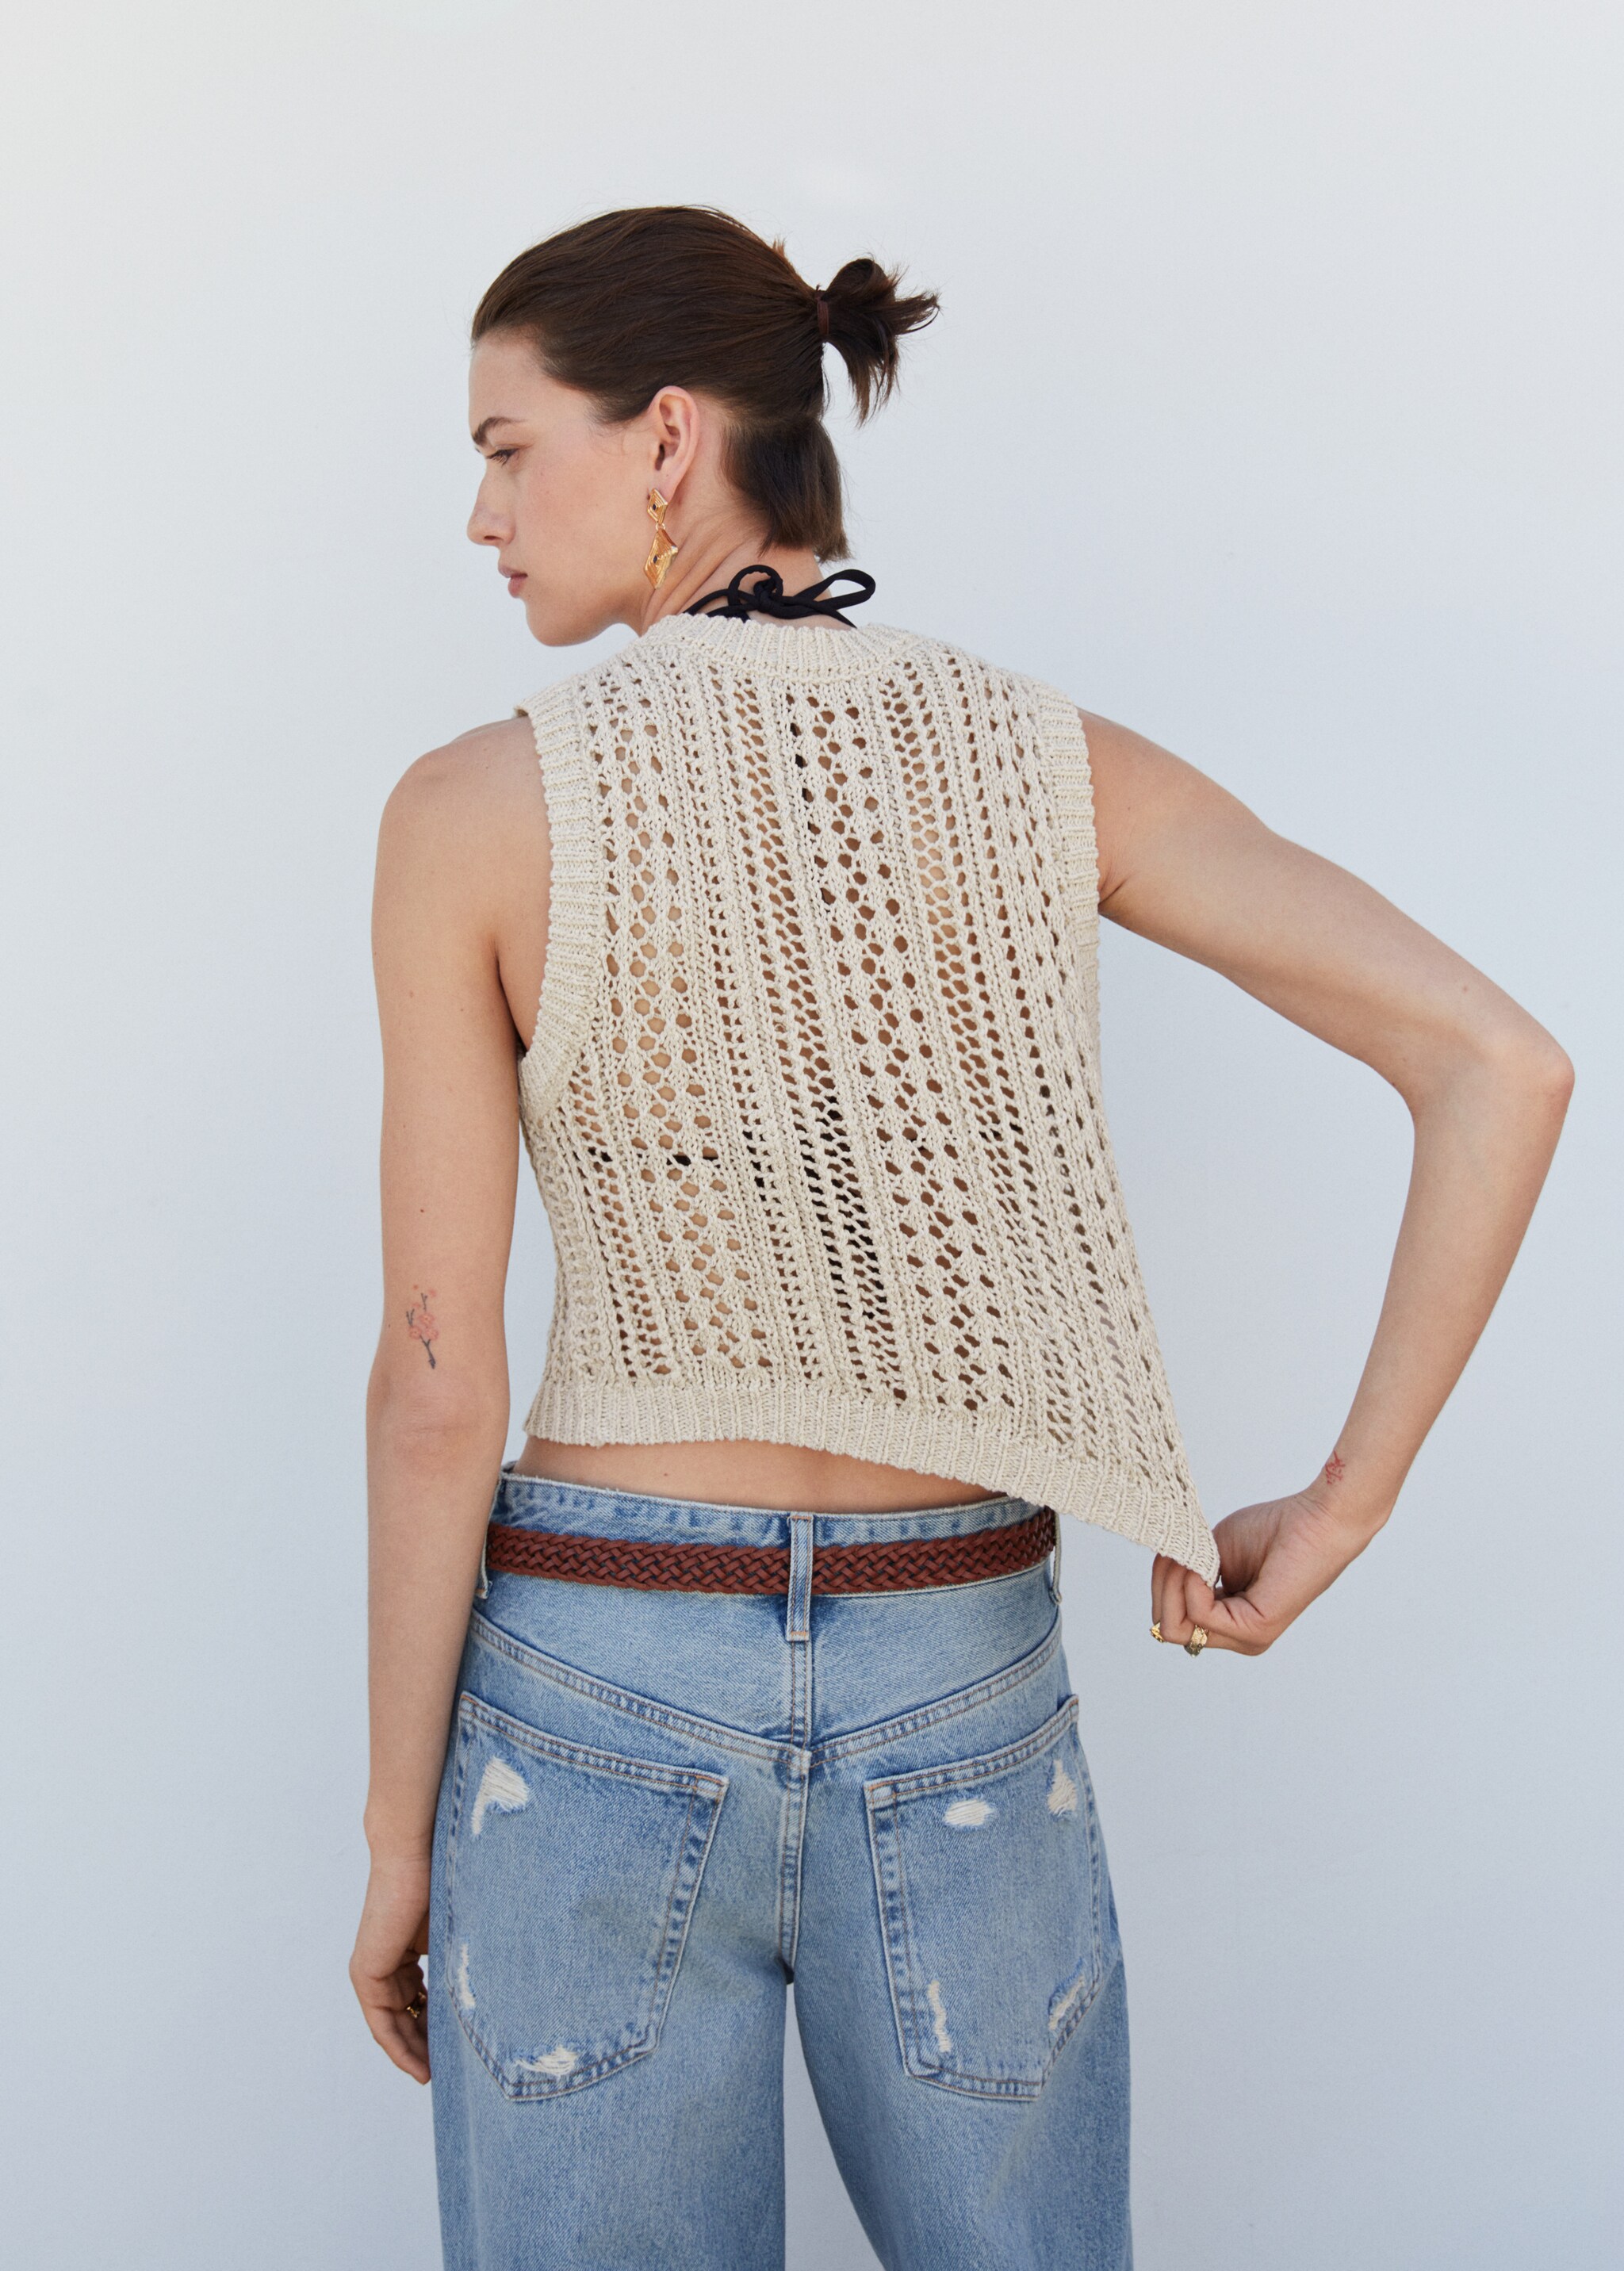 Openwork knit cotton cardigan - Reverse of the article